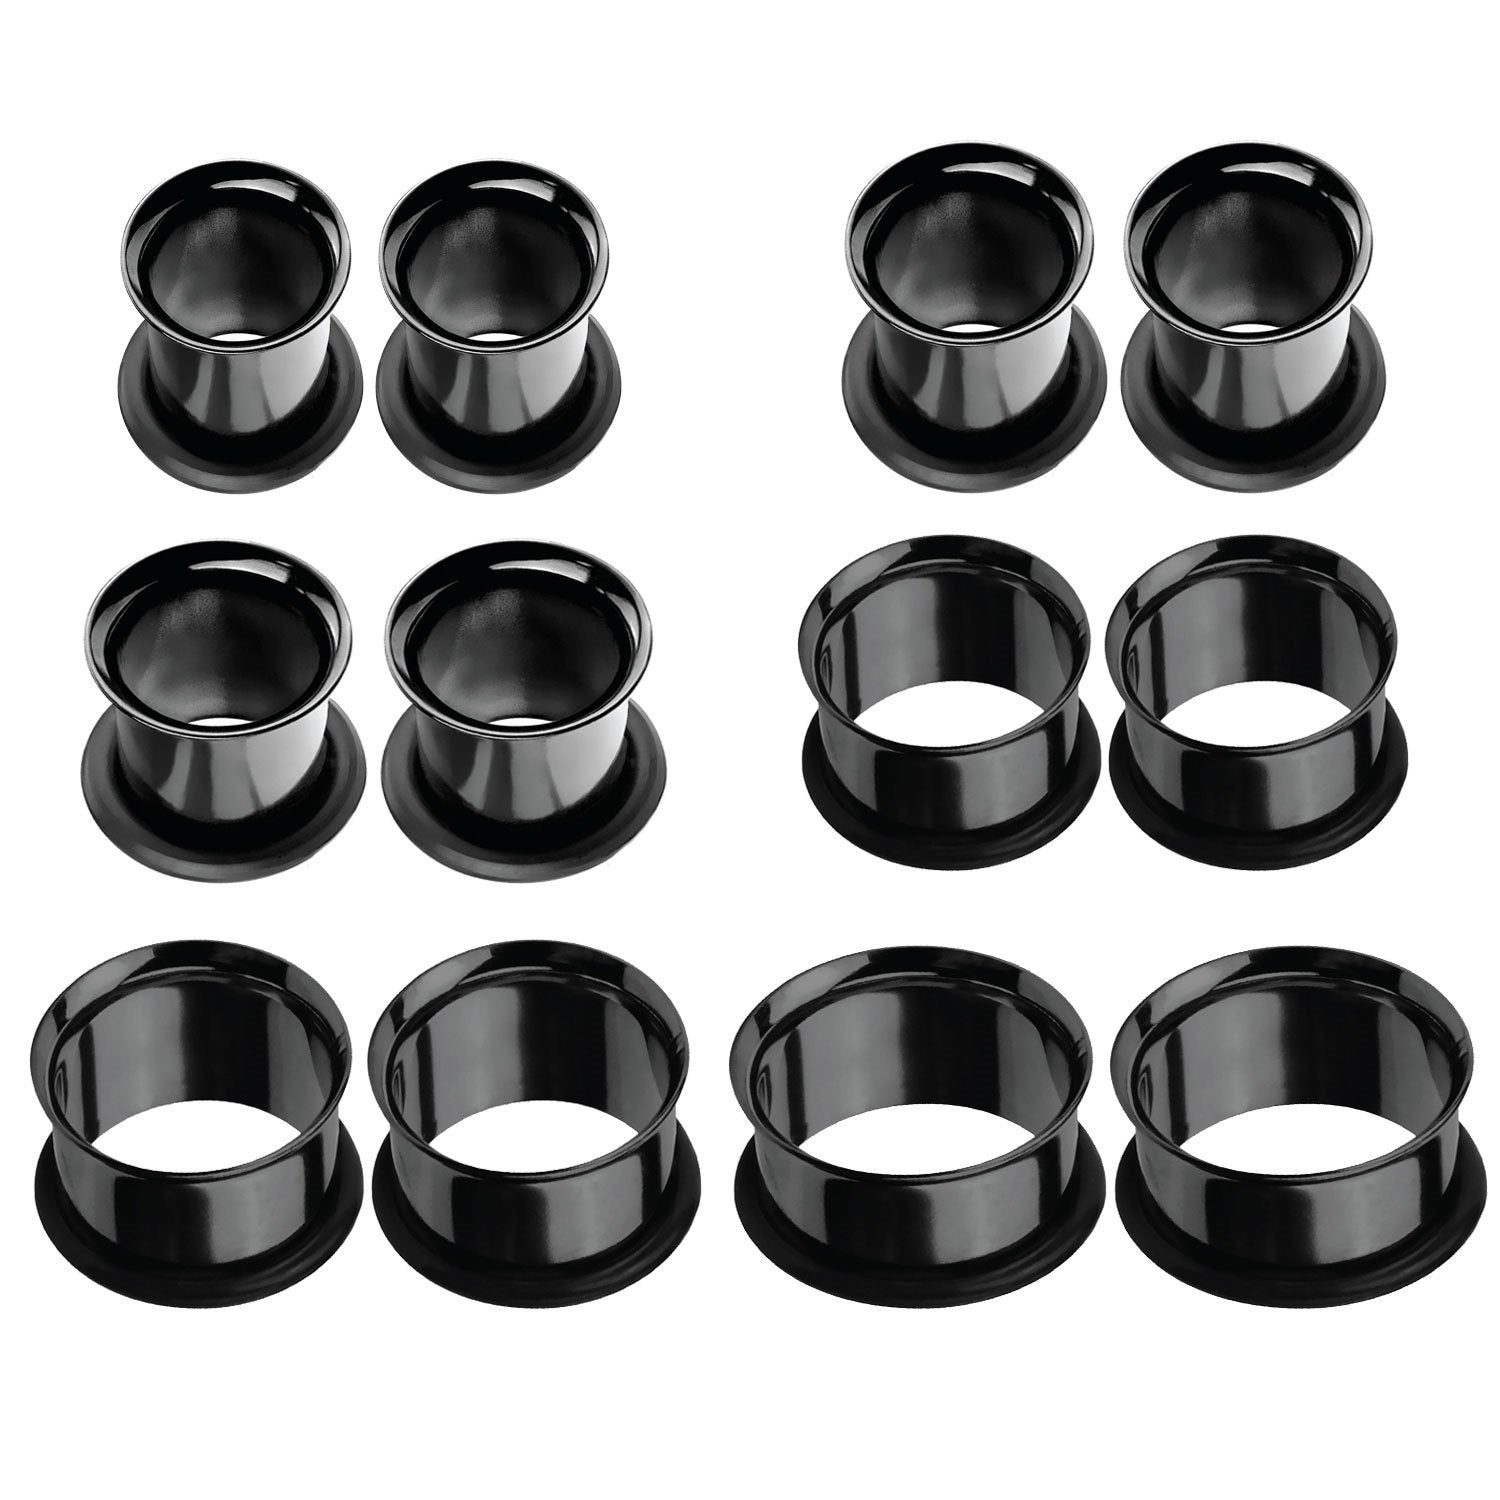 18PC Tunnel Kit Ear Plugs Stretching Set 14G-00G Stainless Steel